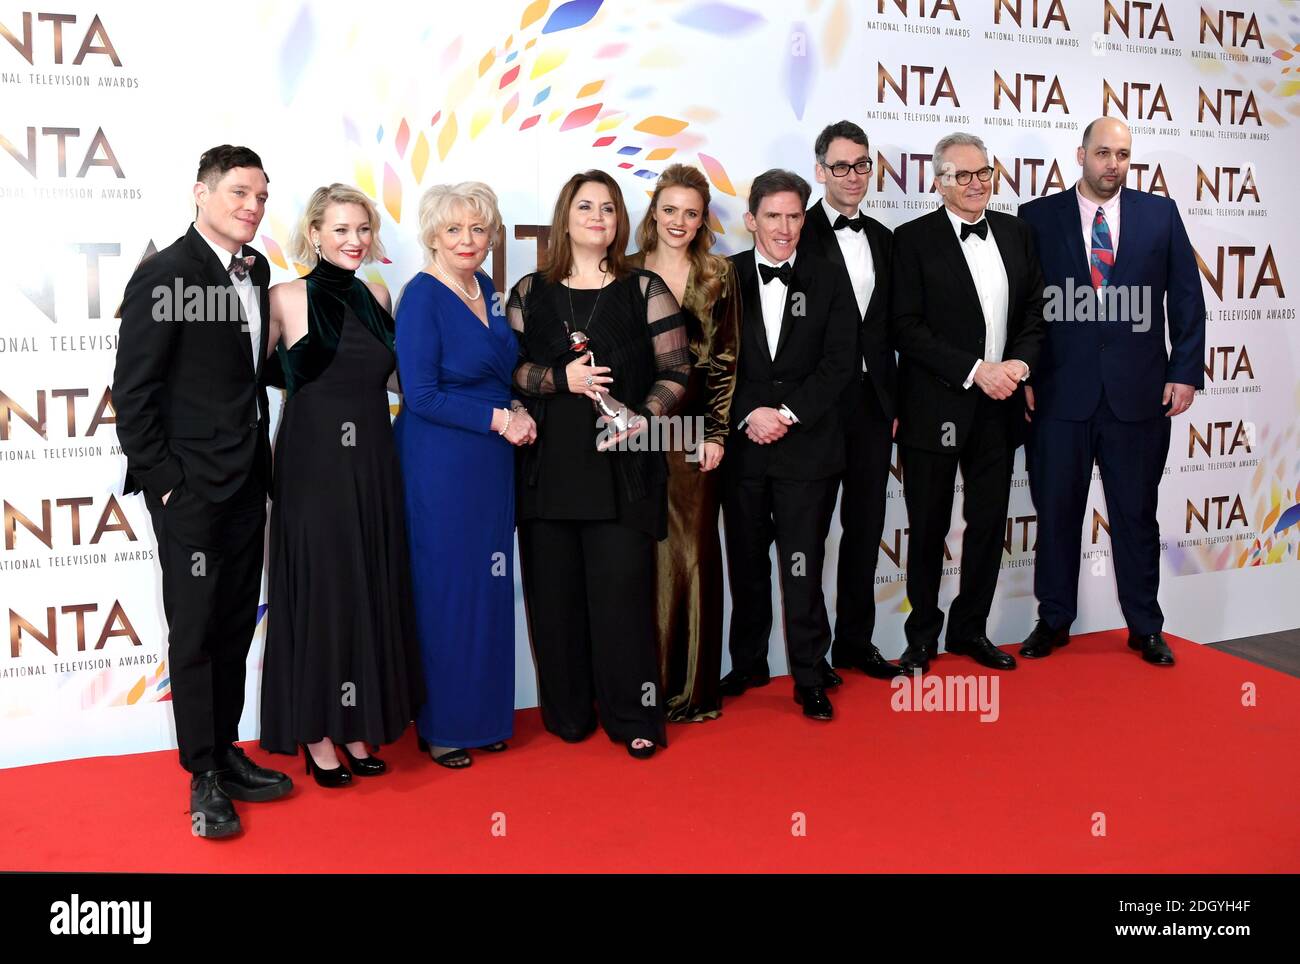 (left to right) Mathew Horne, Joanna Page, Alison Steadman, Ruth Jones, Laura Aikman, Rob Brydon, Robert Wilfort, Larry Lamb and guest with the impact award in the Press Room at the National Television Awards 2020 held at the O2 Arena, London. Photo credit should read: Doug Peters/EMPICS Stock Photo